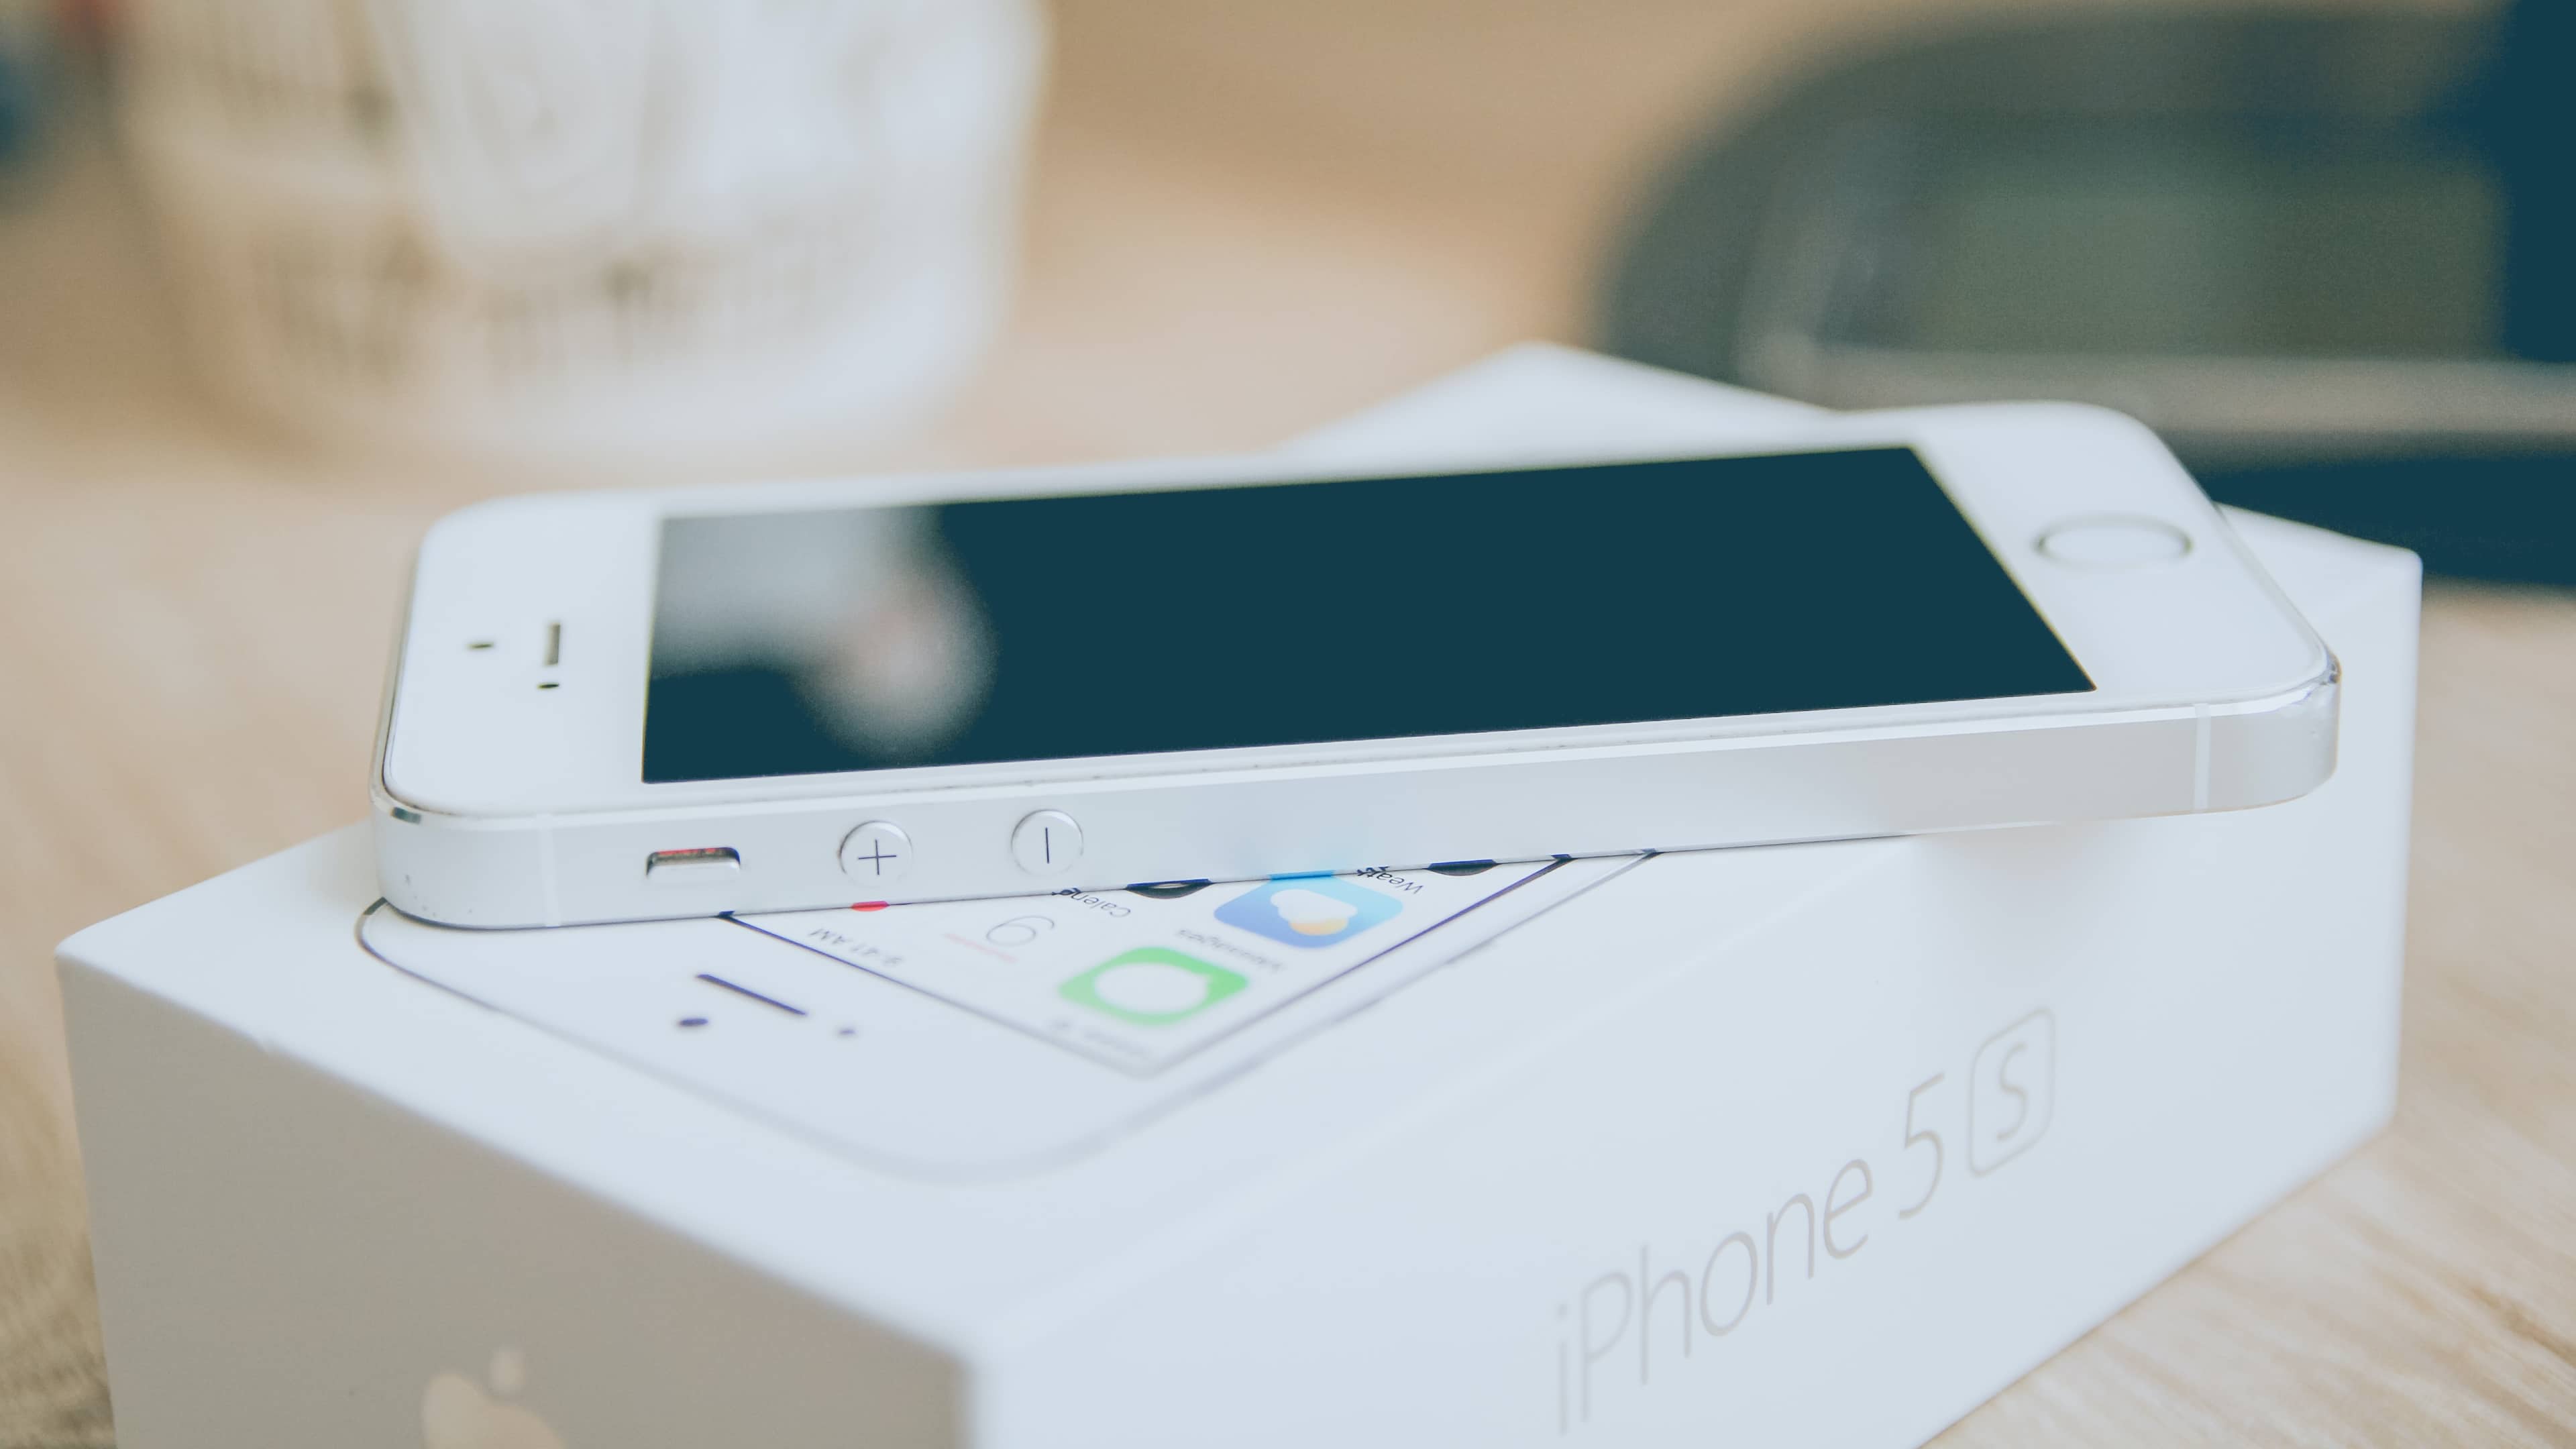 The iPhone 5S (2013) and other old devices get critical security patches